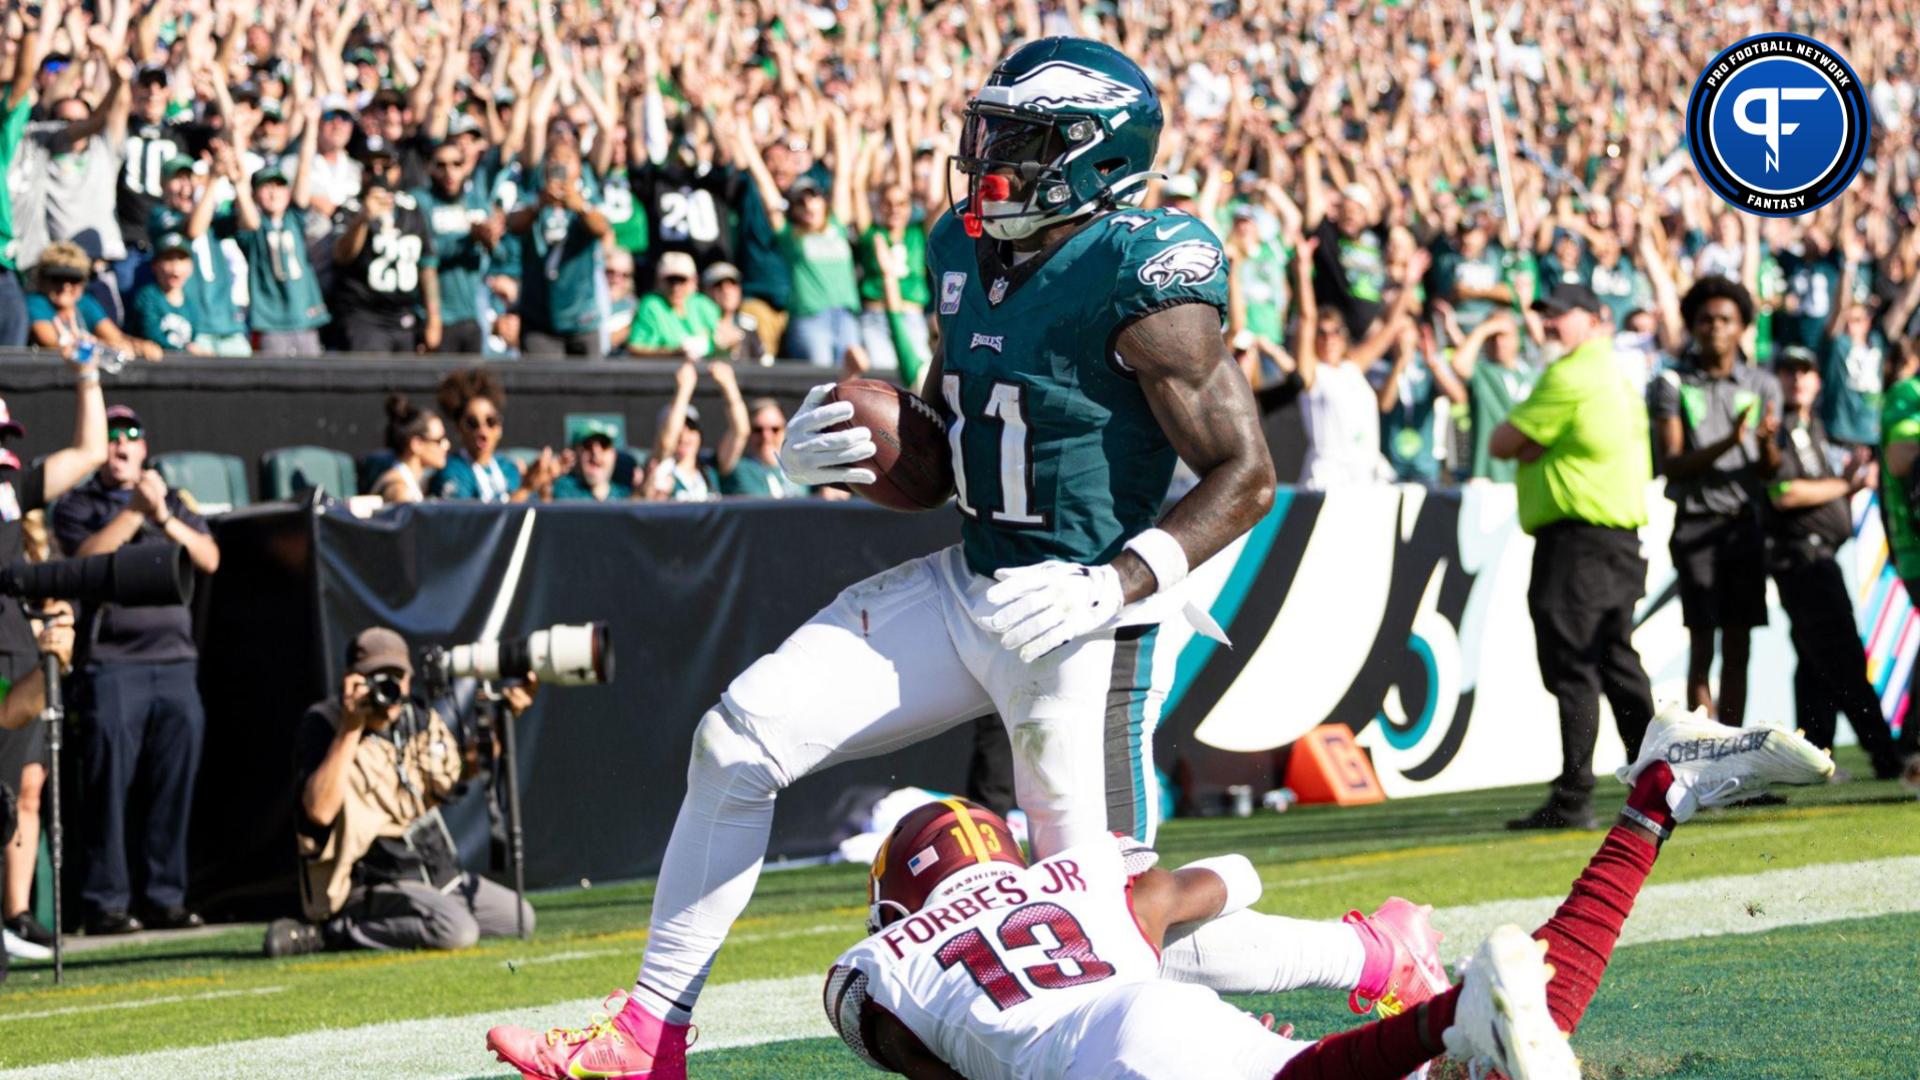 Fantasy Football Rankings: Five Eagles players listed in the top